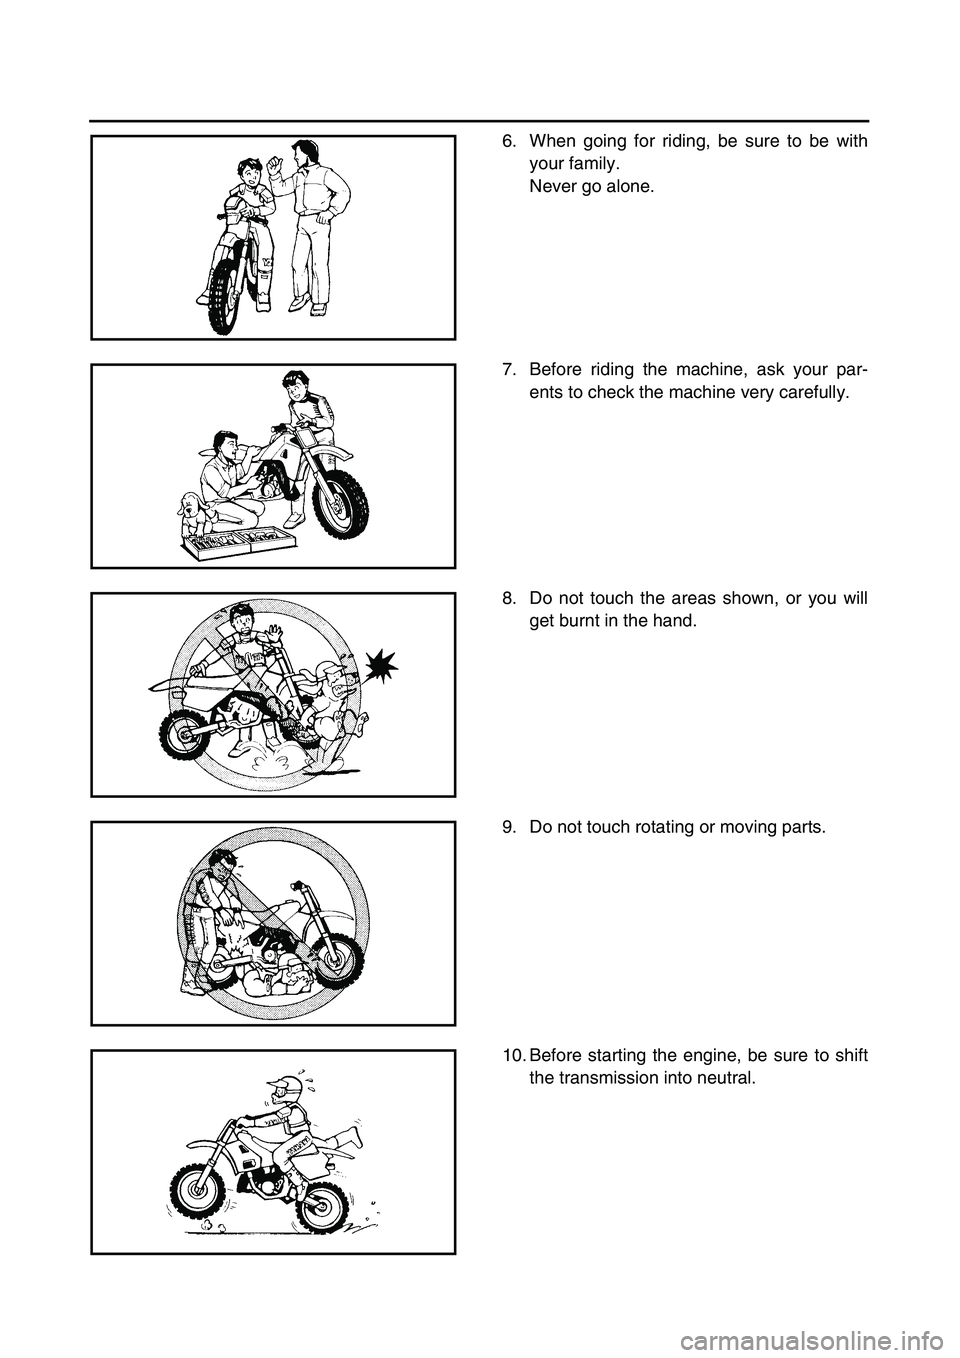 YAMAHA TTR125 2003  Owners Manual  
6. When going for riding, be sure to be with
your family.
Never go alone. 
7. Before riding the machine, ask your par-
ents to check the machine very carefully. 
8. Do not touch the areas shown, or 